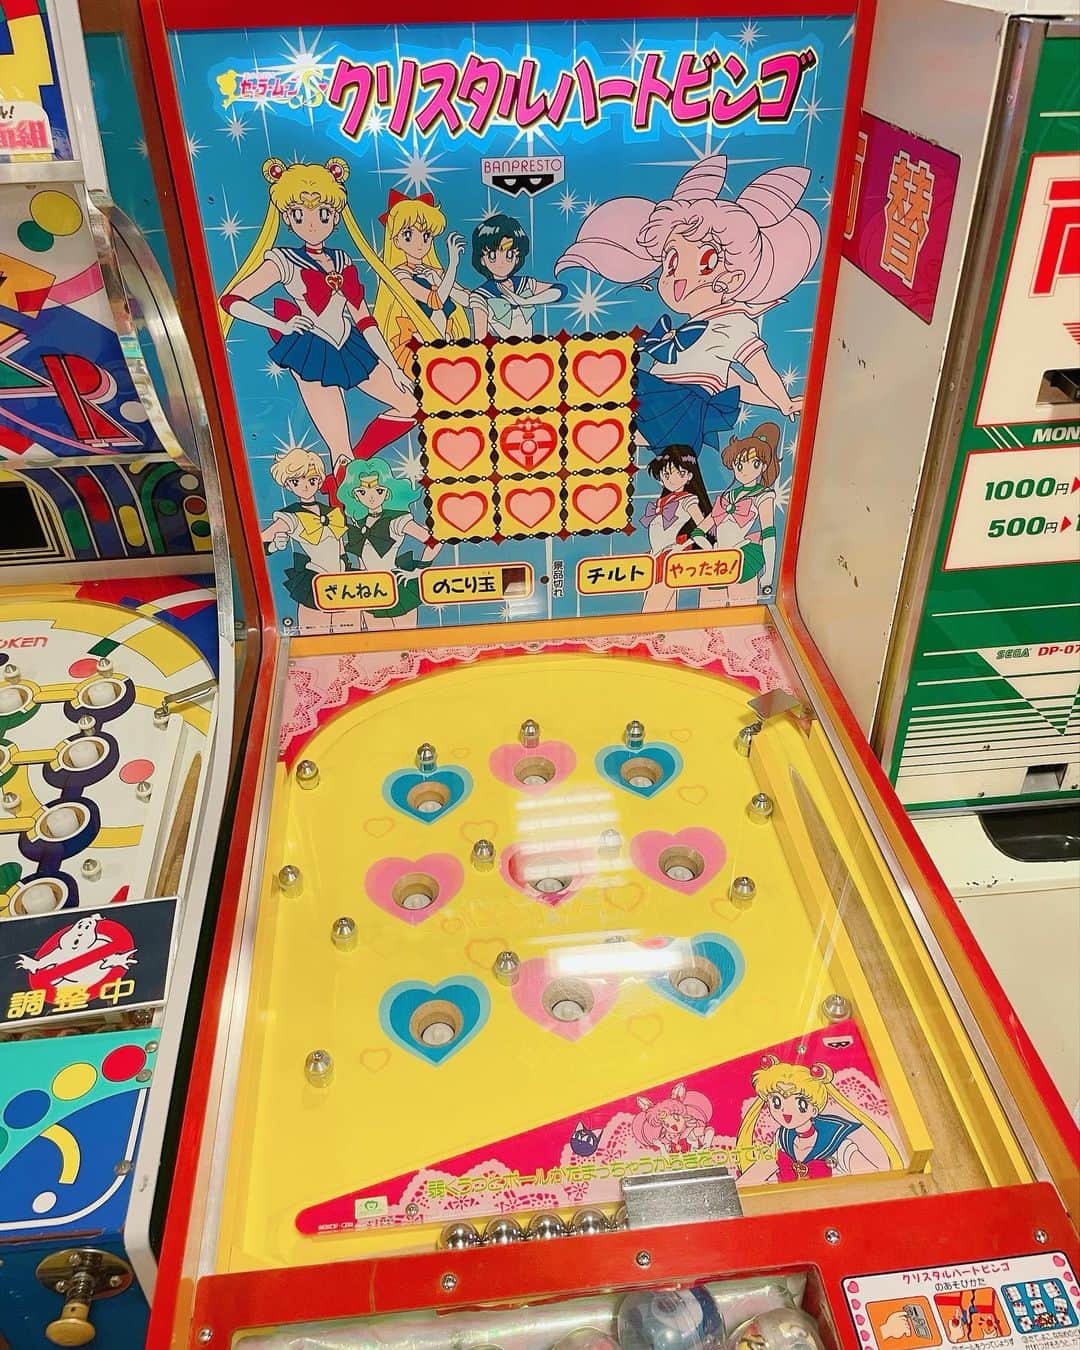 Sailor Moonのインスタグラム：「✨🌙 I was super pumped that I won the Sailor Moon game at Decks (Odaiba, Tokyo). But since I didn’t get video of it did it really happen? 🤔🌙✨  #sailormoon #セーラームーン #odaiba #tokyo #japan」